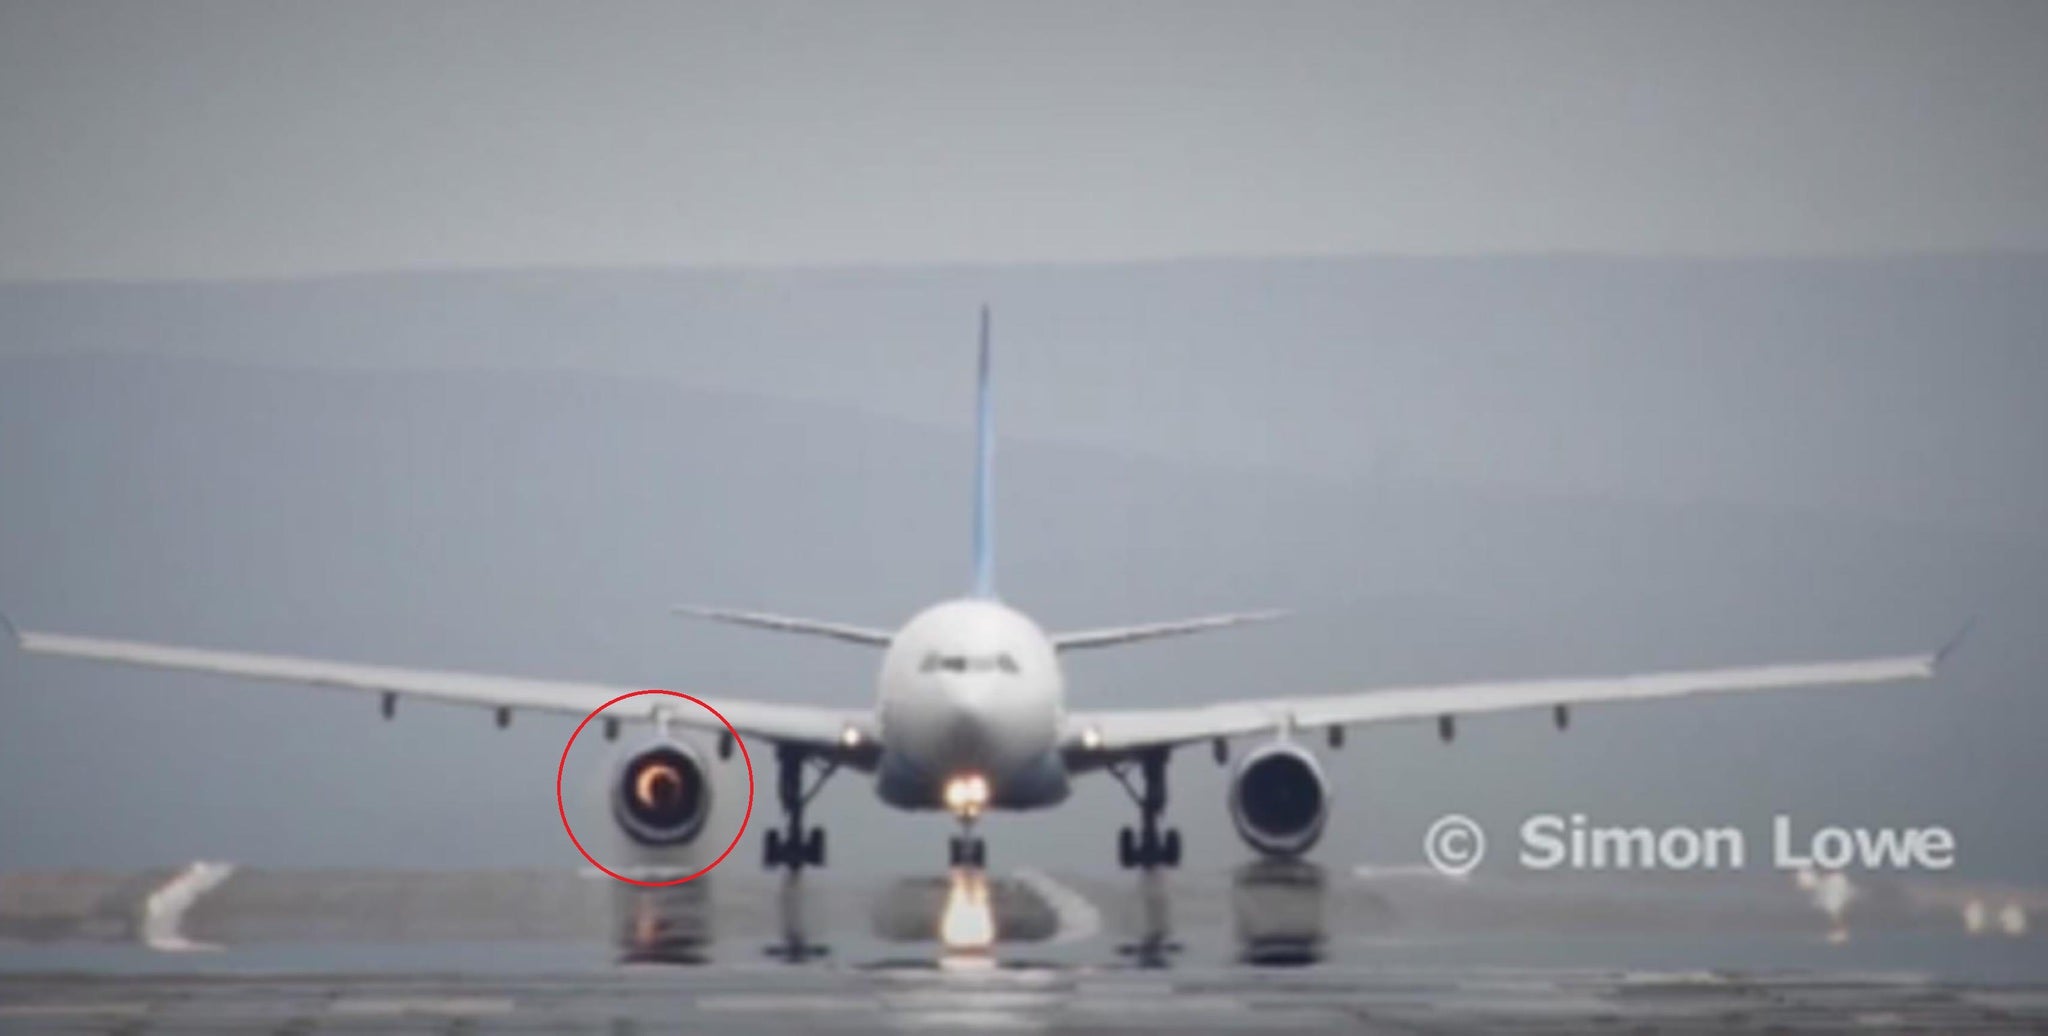 The engine can be seen exploding in the video